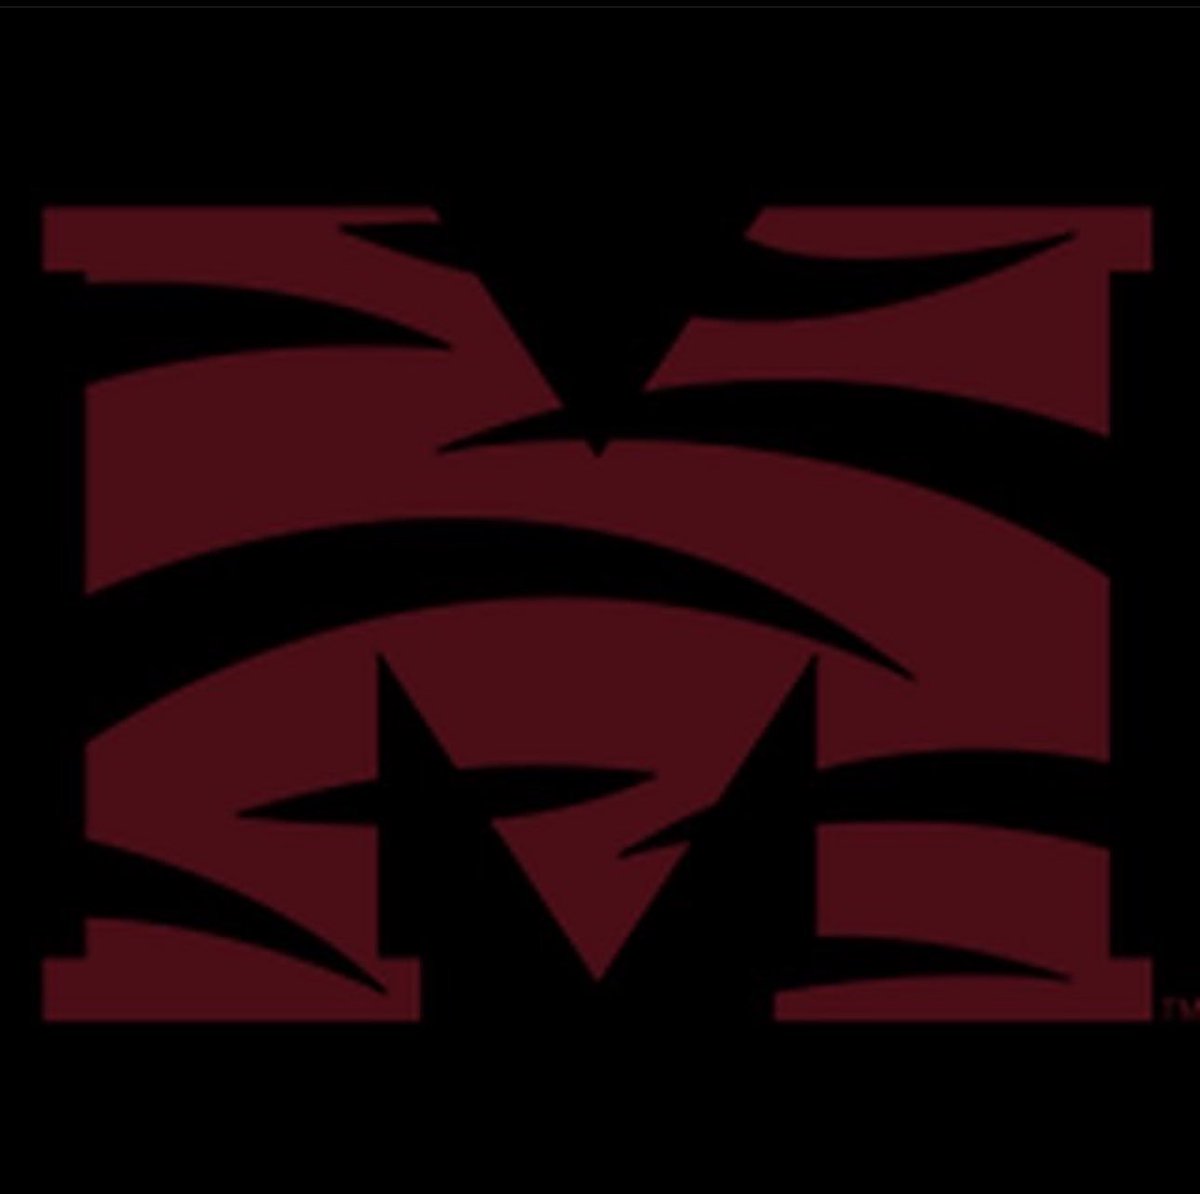 After a great conversation with @coachmathis81 I’m blessed to receive my first HBCU offer @MorehouseFB @Coach_Russ_6 @RecruitLambert @deucerecruiting @CoachDaniels06 @JeremyO_Johnson @ChadSimmons_ @One11Recruiting @MohrRecruiting @CJacksonPRZ @najehwilk @RyanWrightRNG @Rivals…